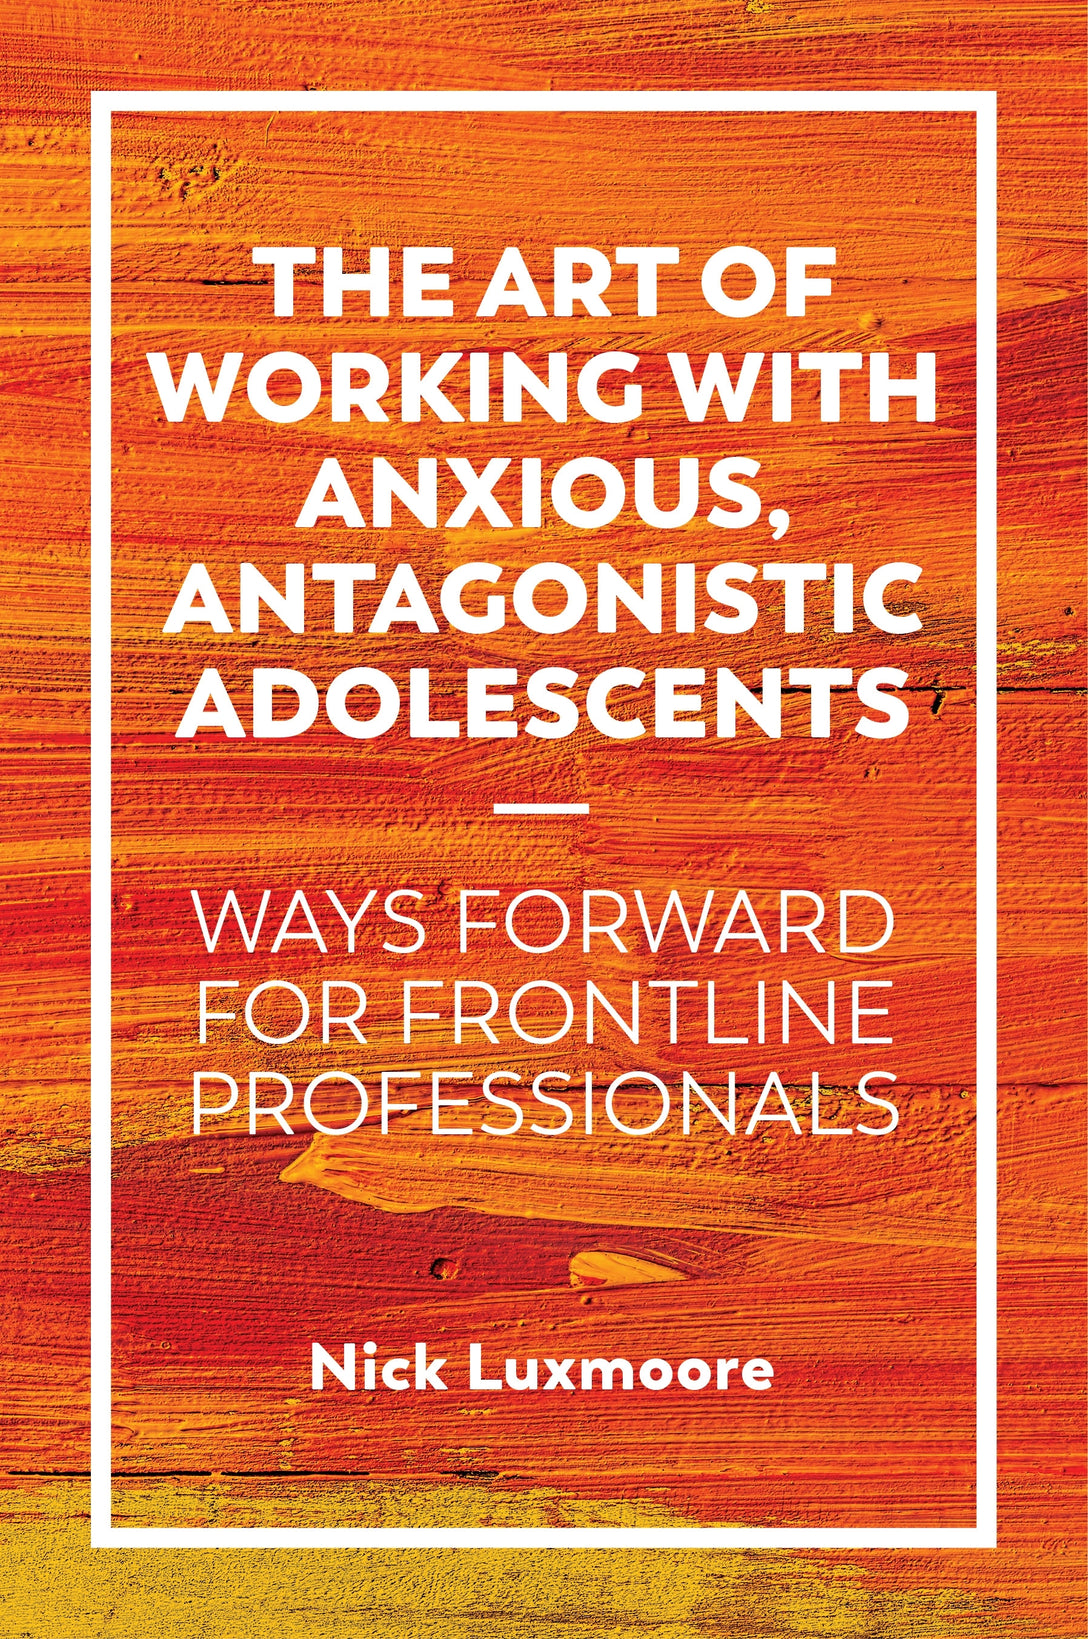 The Art of Working with Anxious, Antagonistic Adolescents by Nick Luxmoore